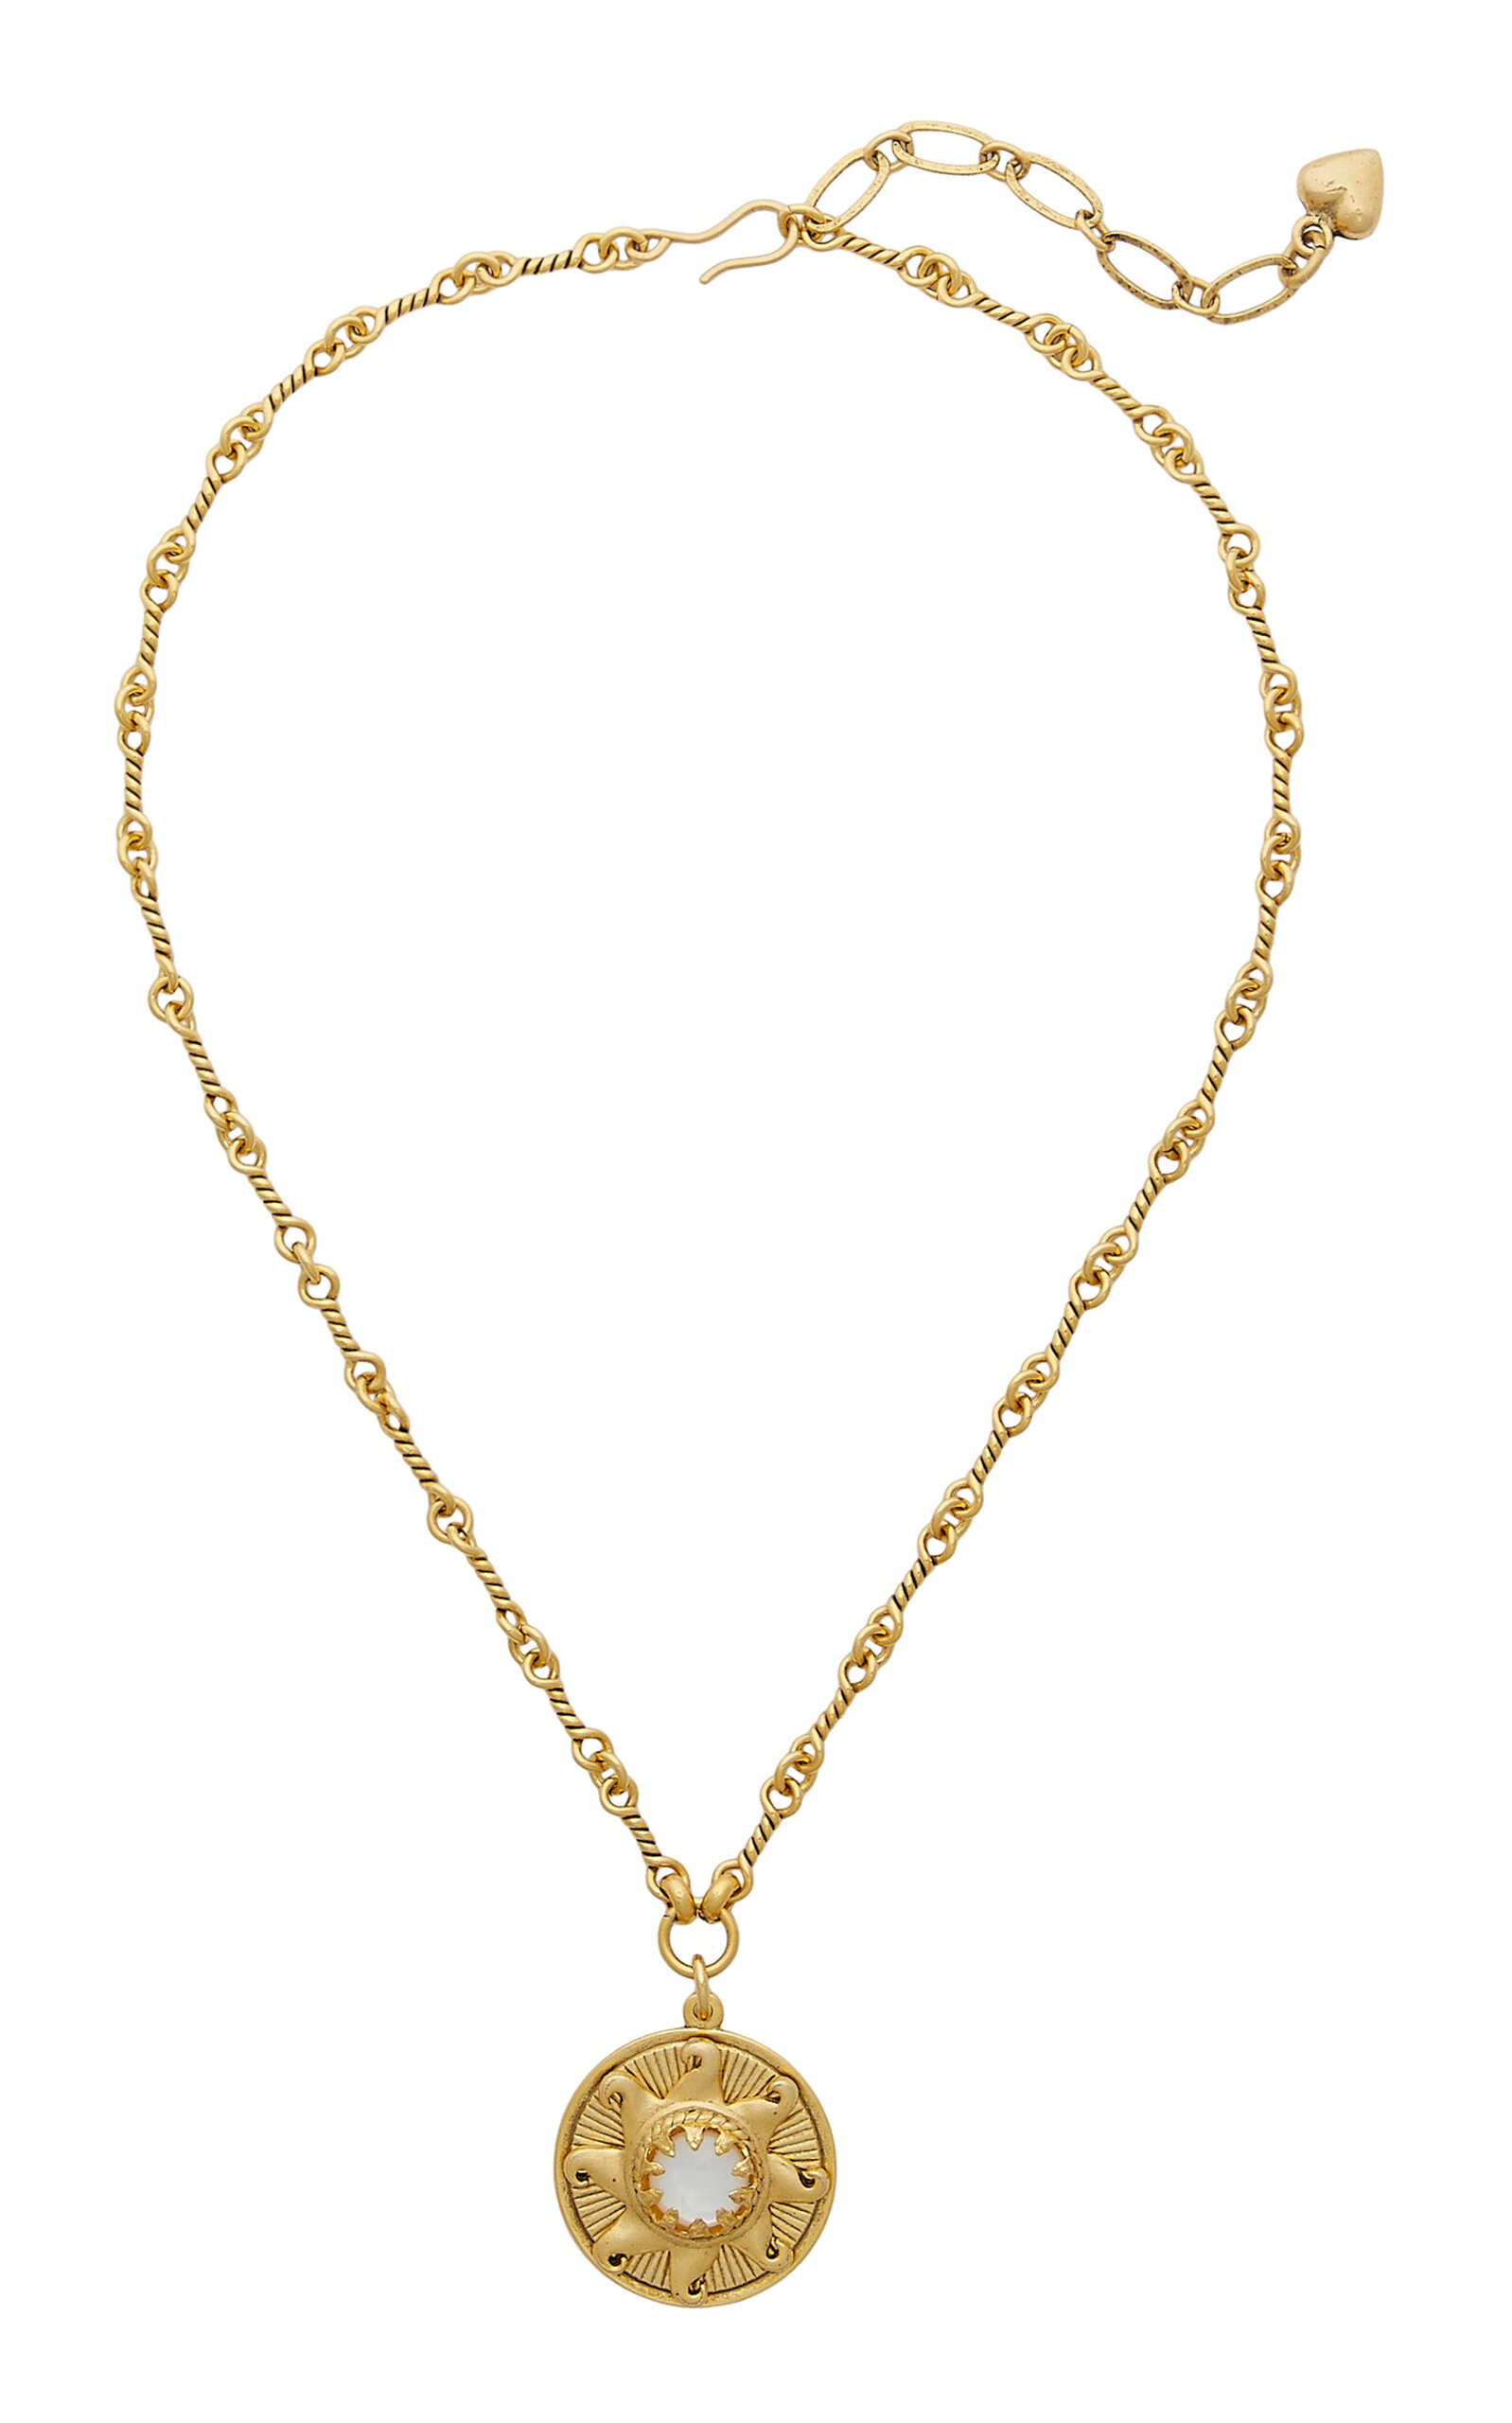 Brinker & Eliza Whitney 24k Gold-plated Mother-of-pearl Necklace